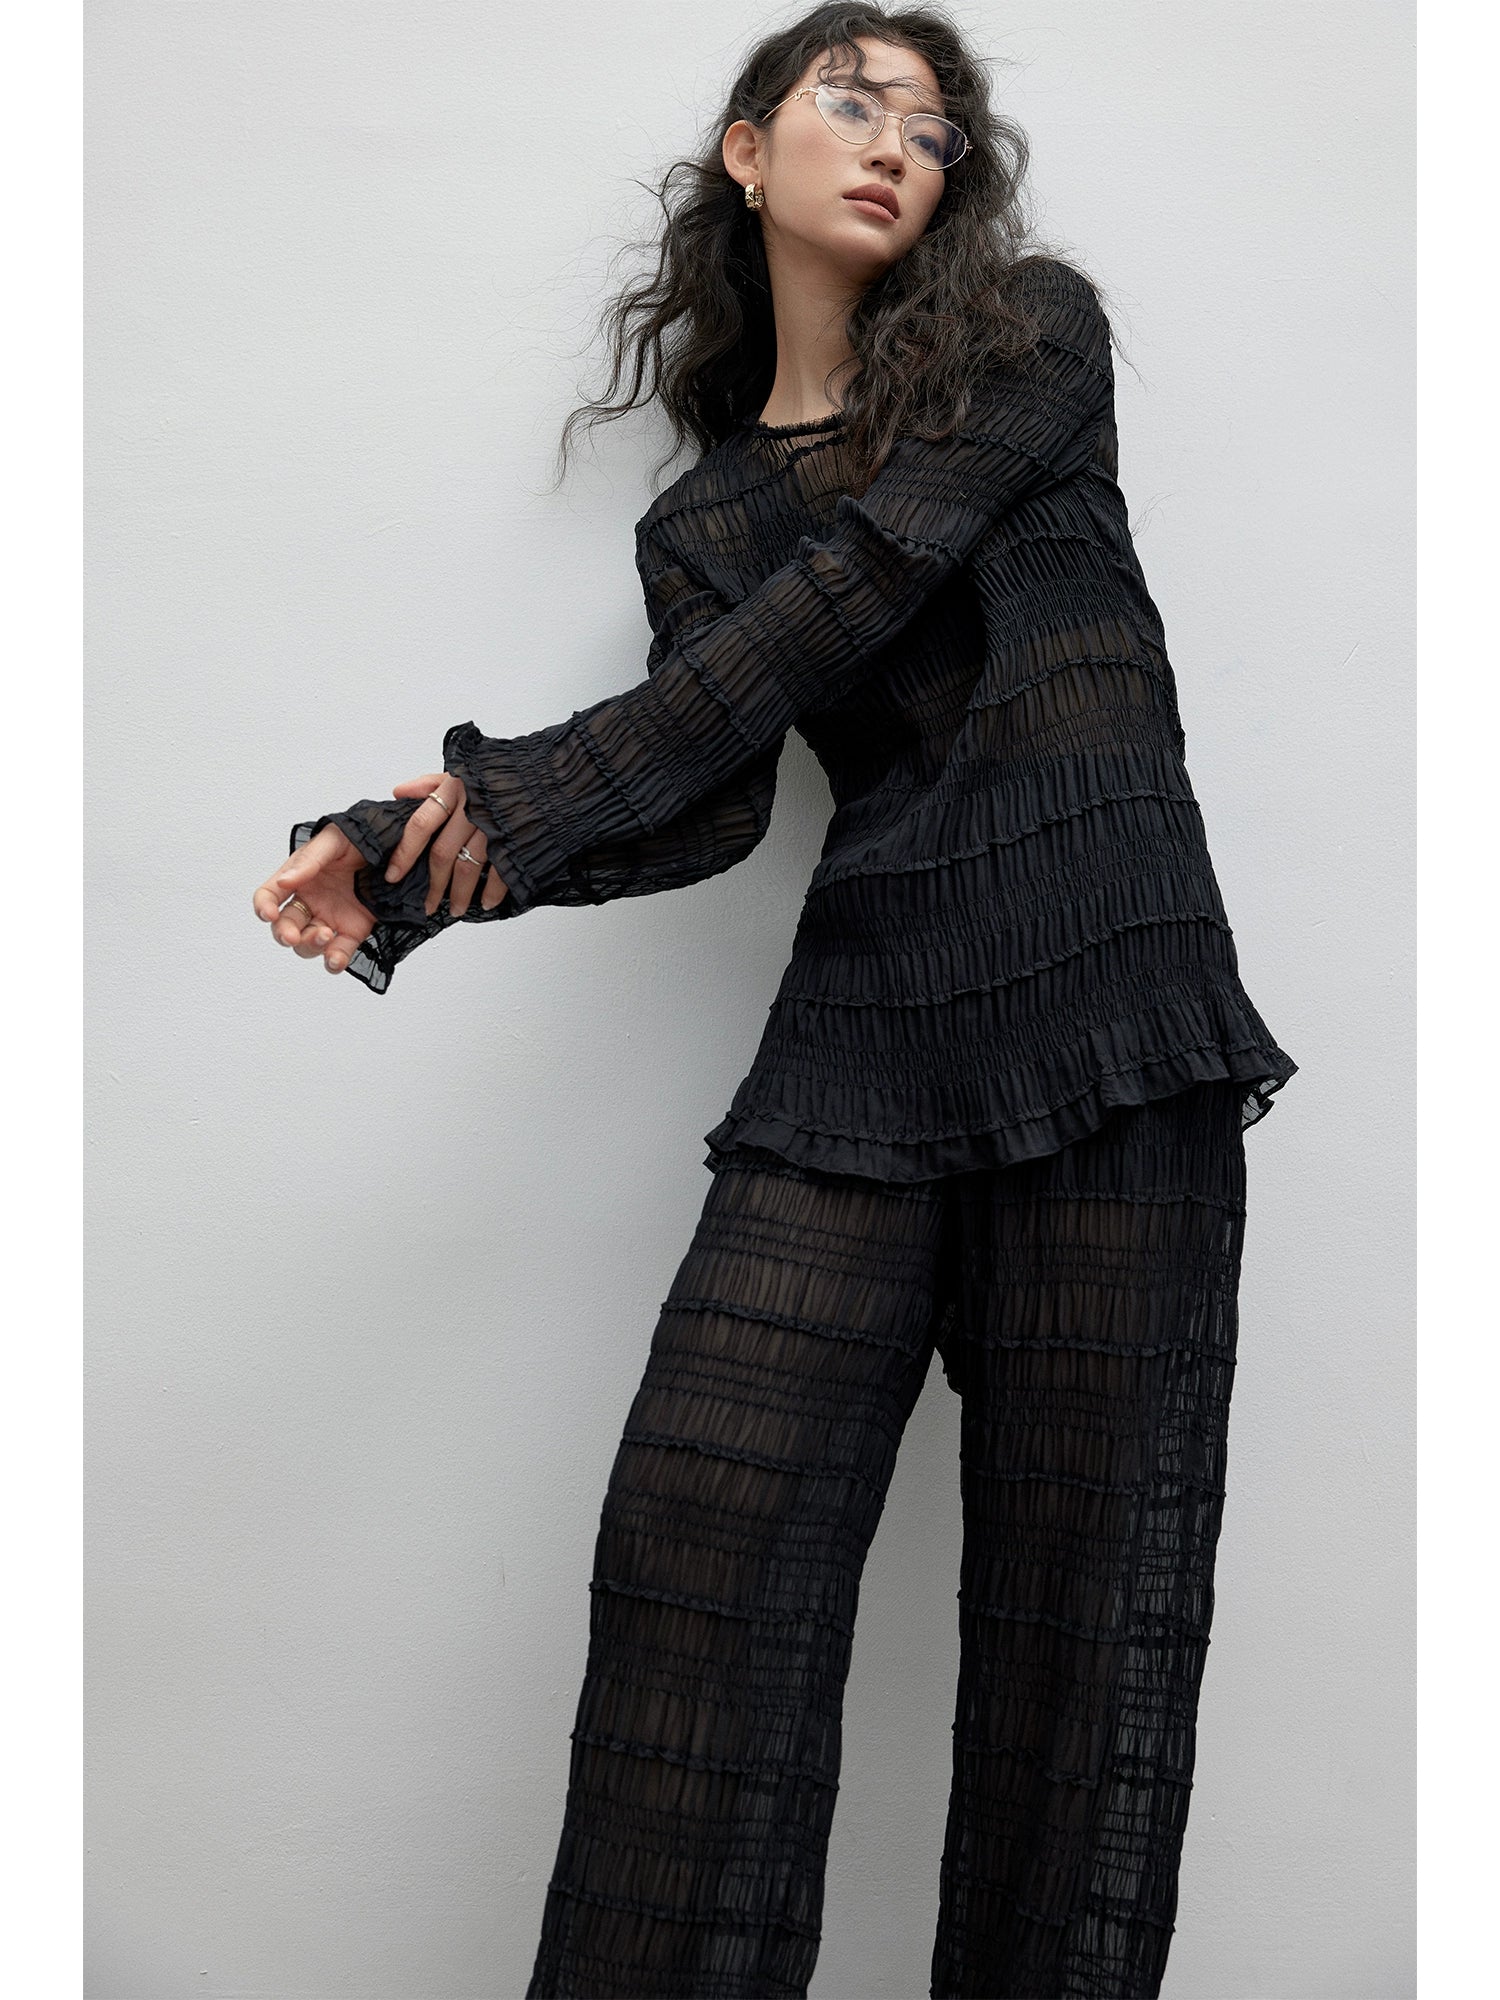 Layered Pleated Embroidered Top Loose-fitting Wide Pants Suit_BDHL5833 - HELROUS